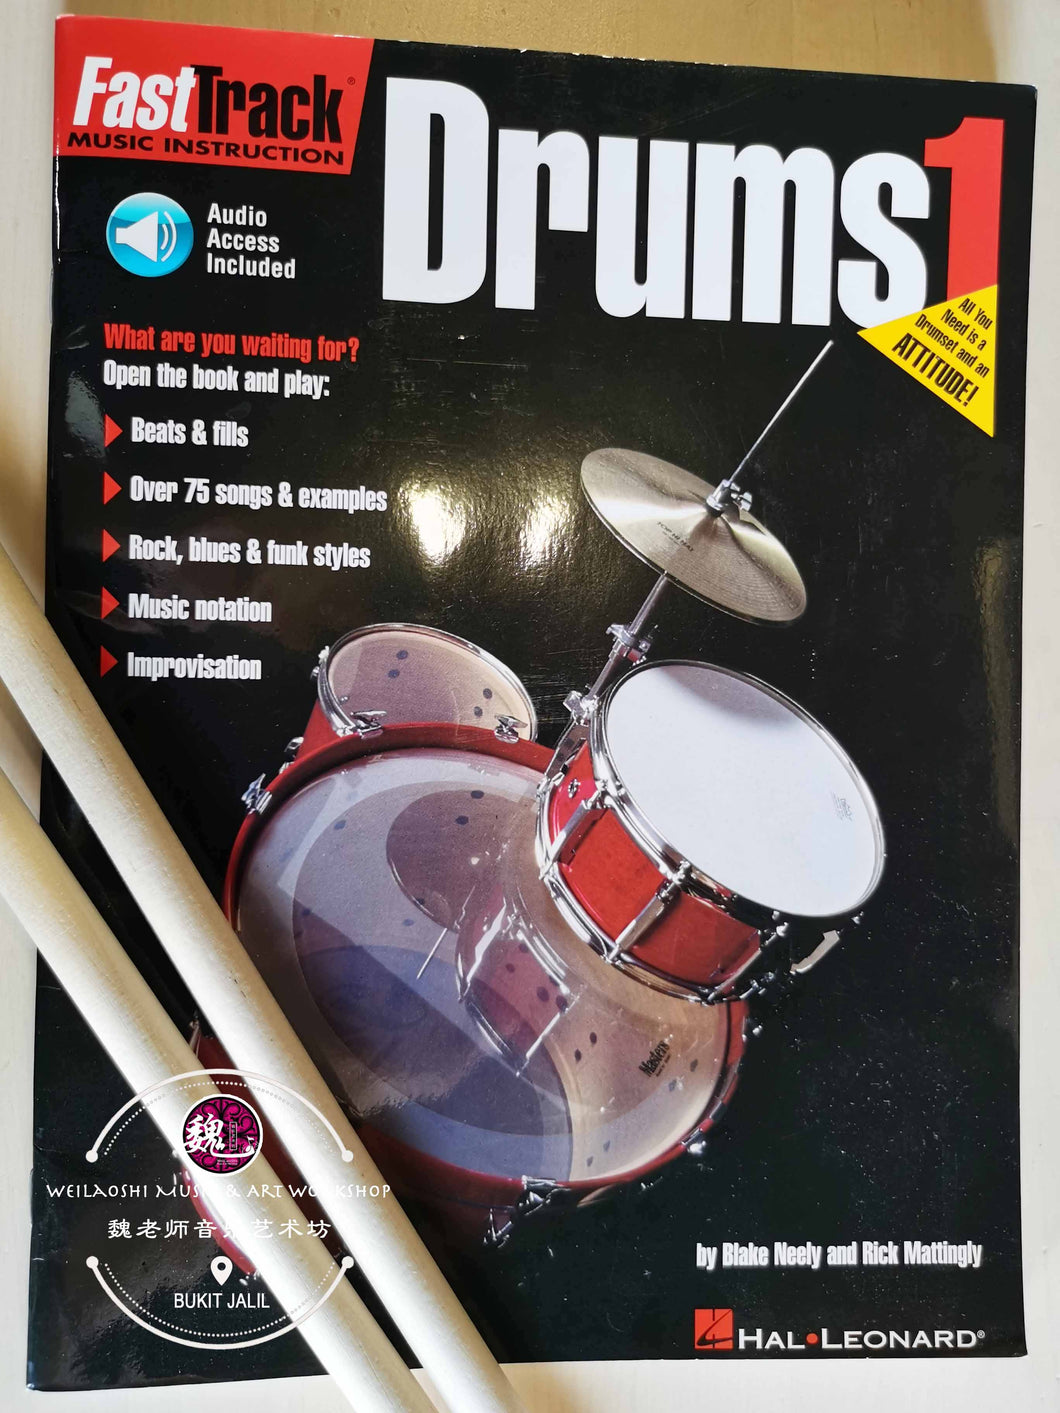 Fast Track Music Instruction Drums 1 by Hal Leonard